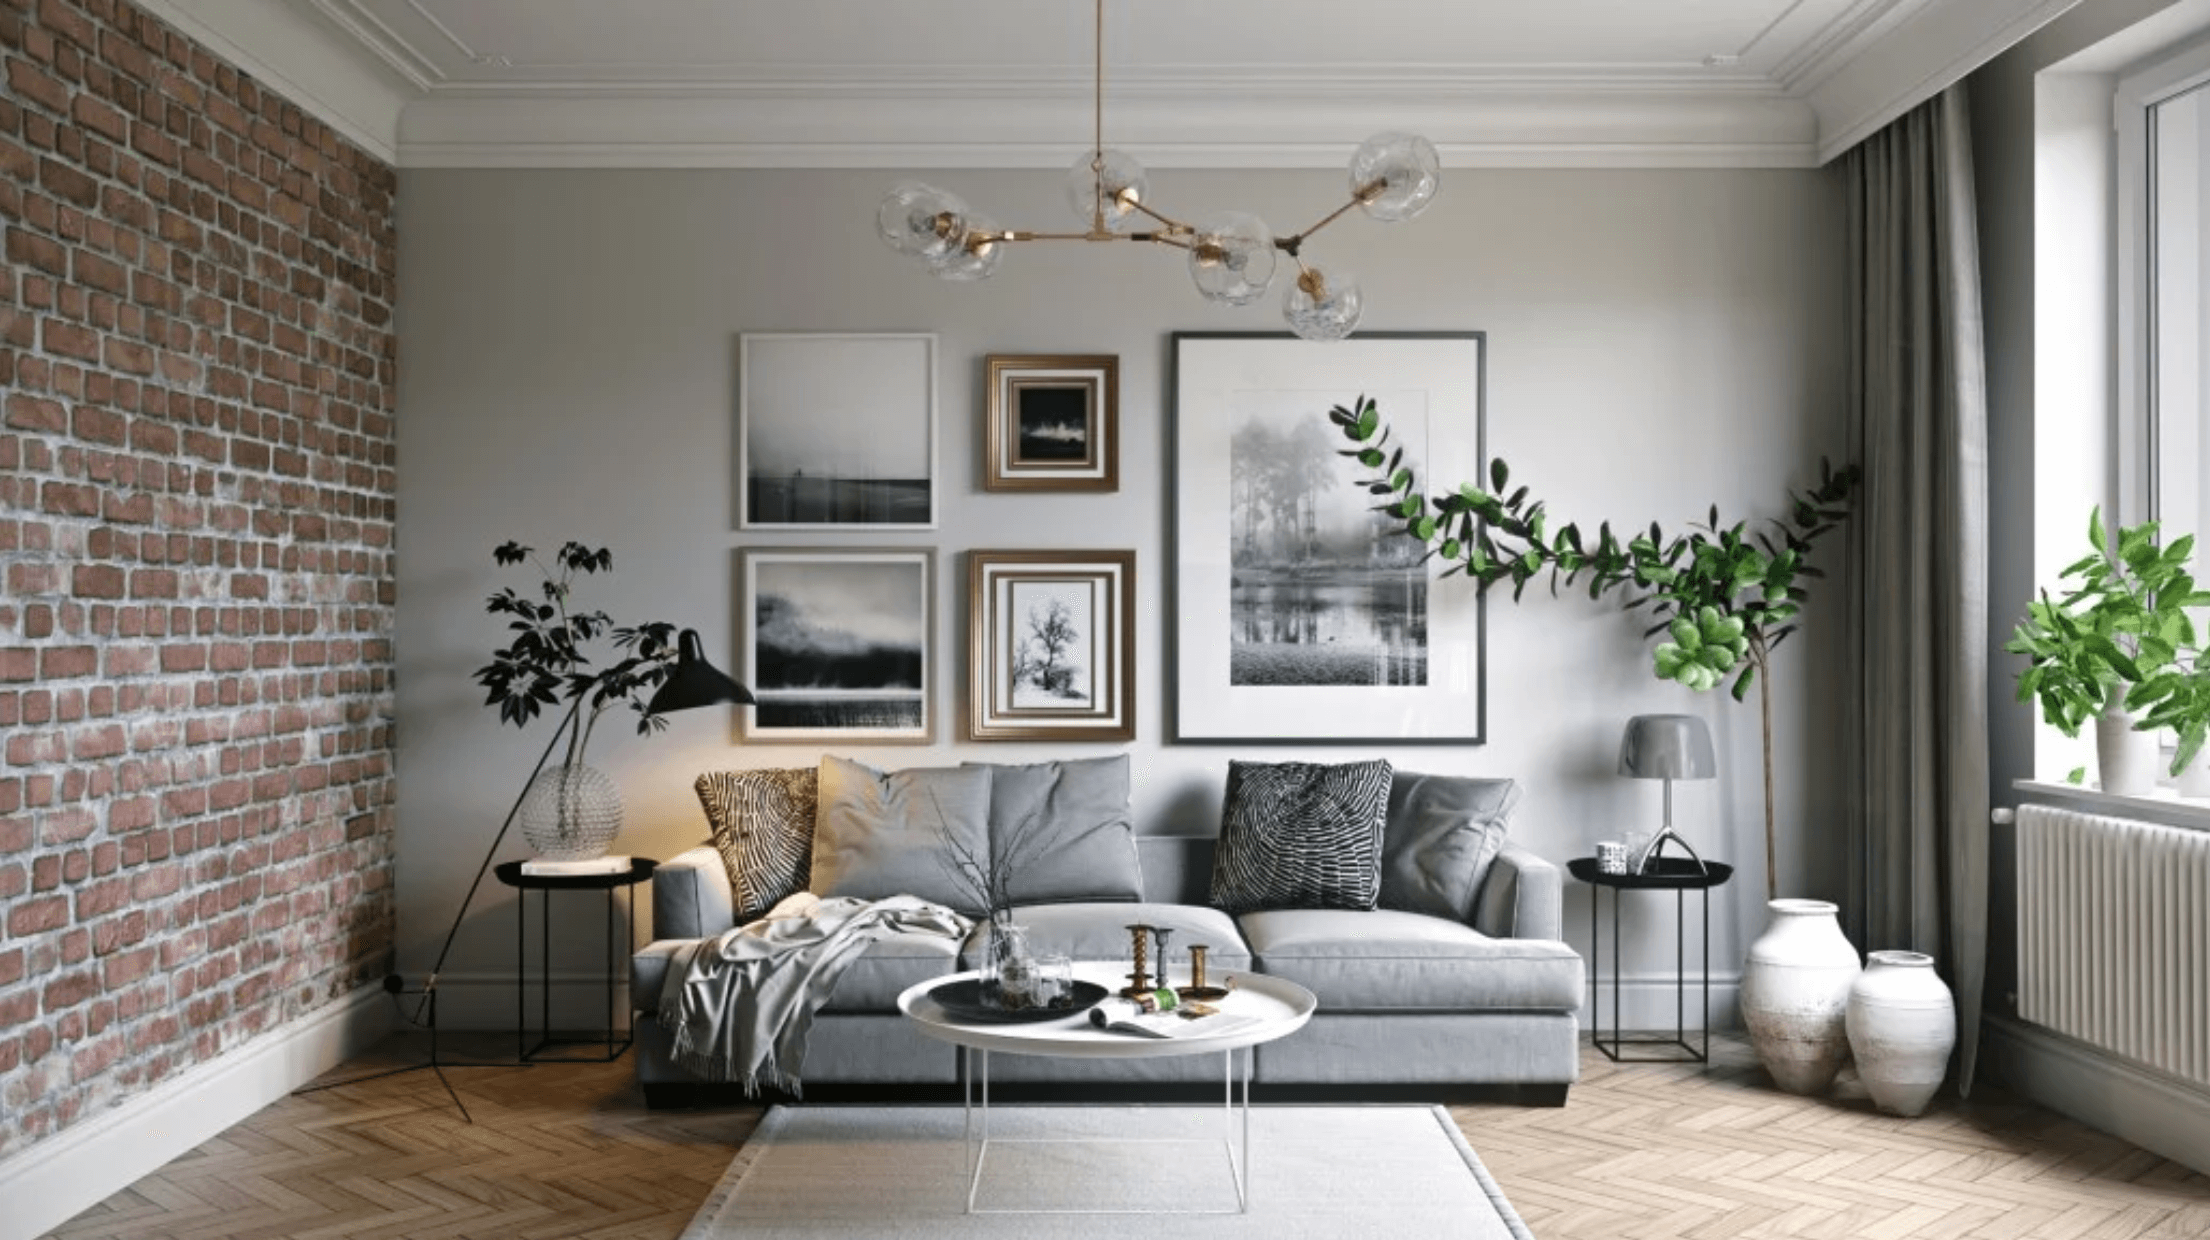 Home Decor Living Room: Add A Touch Of Elegance To Your Home